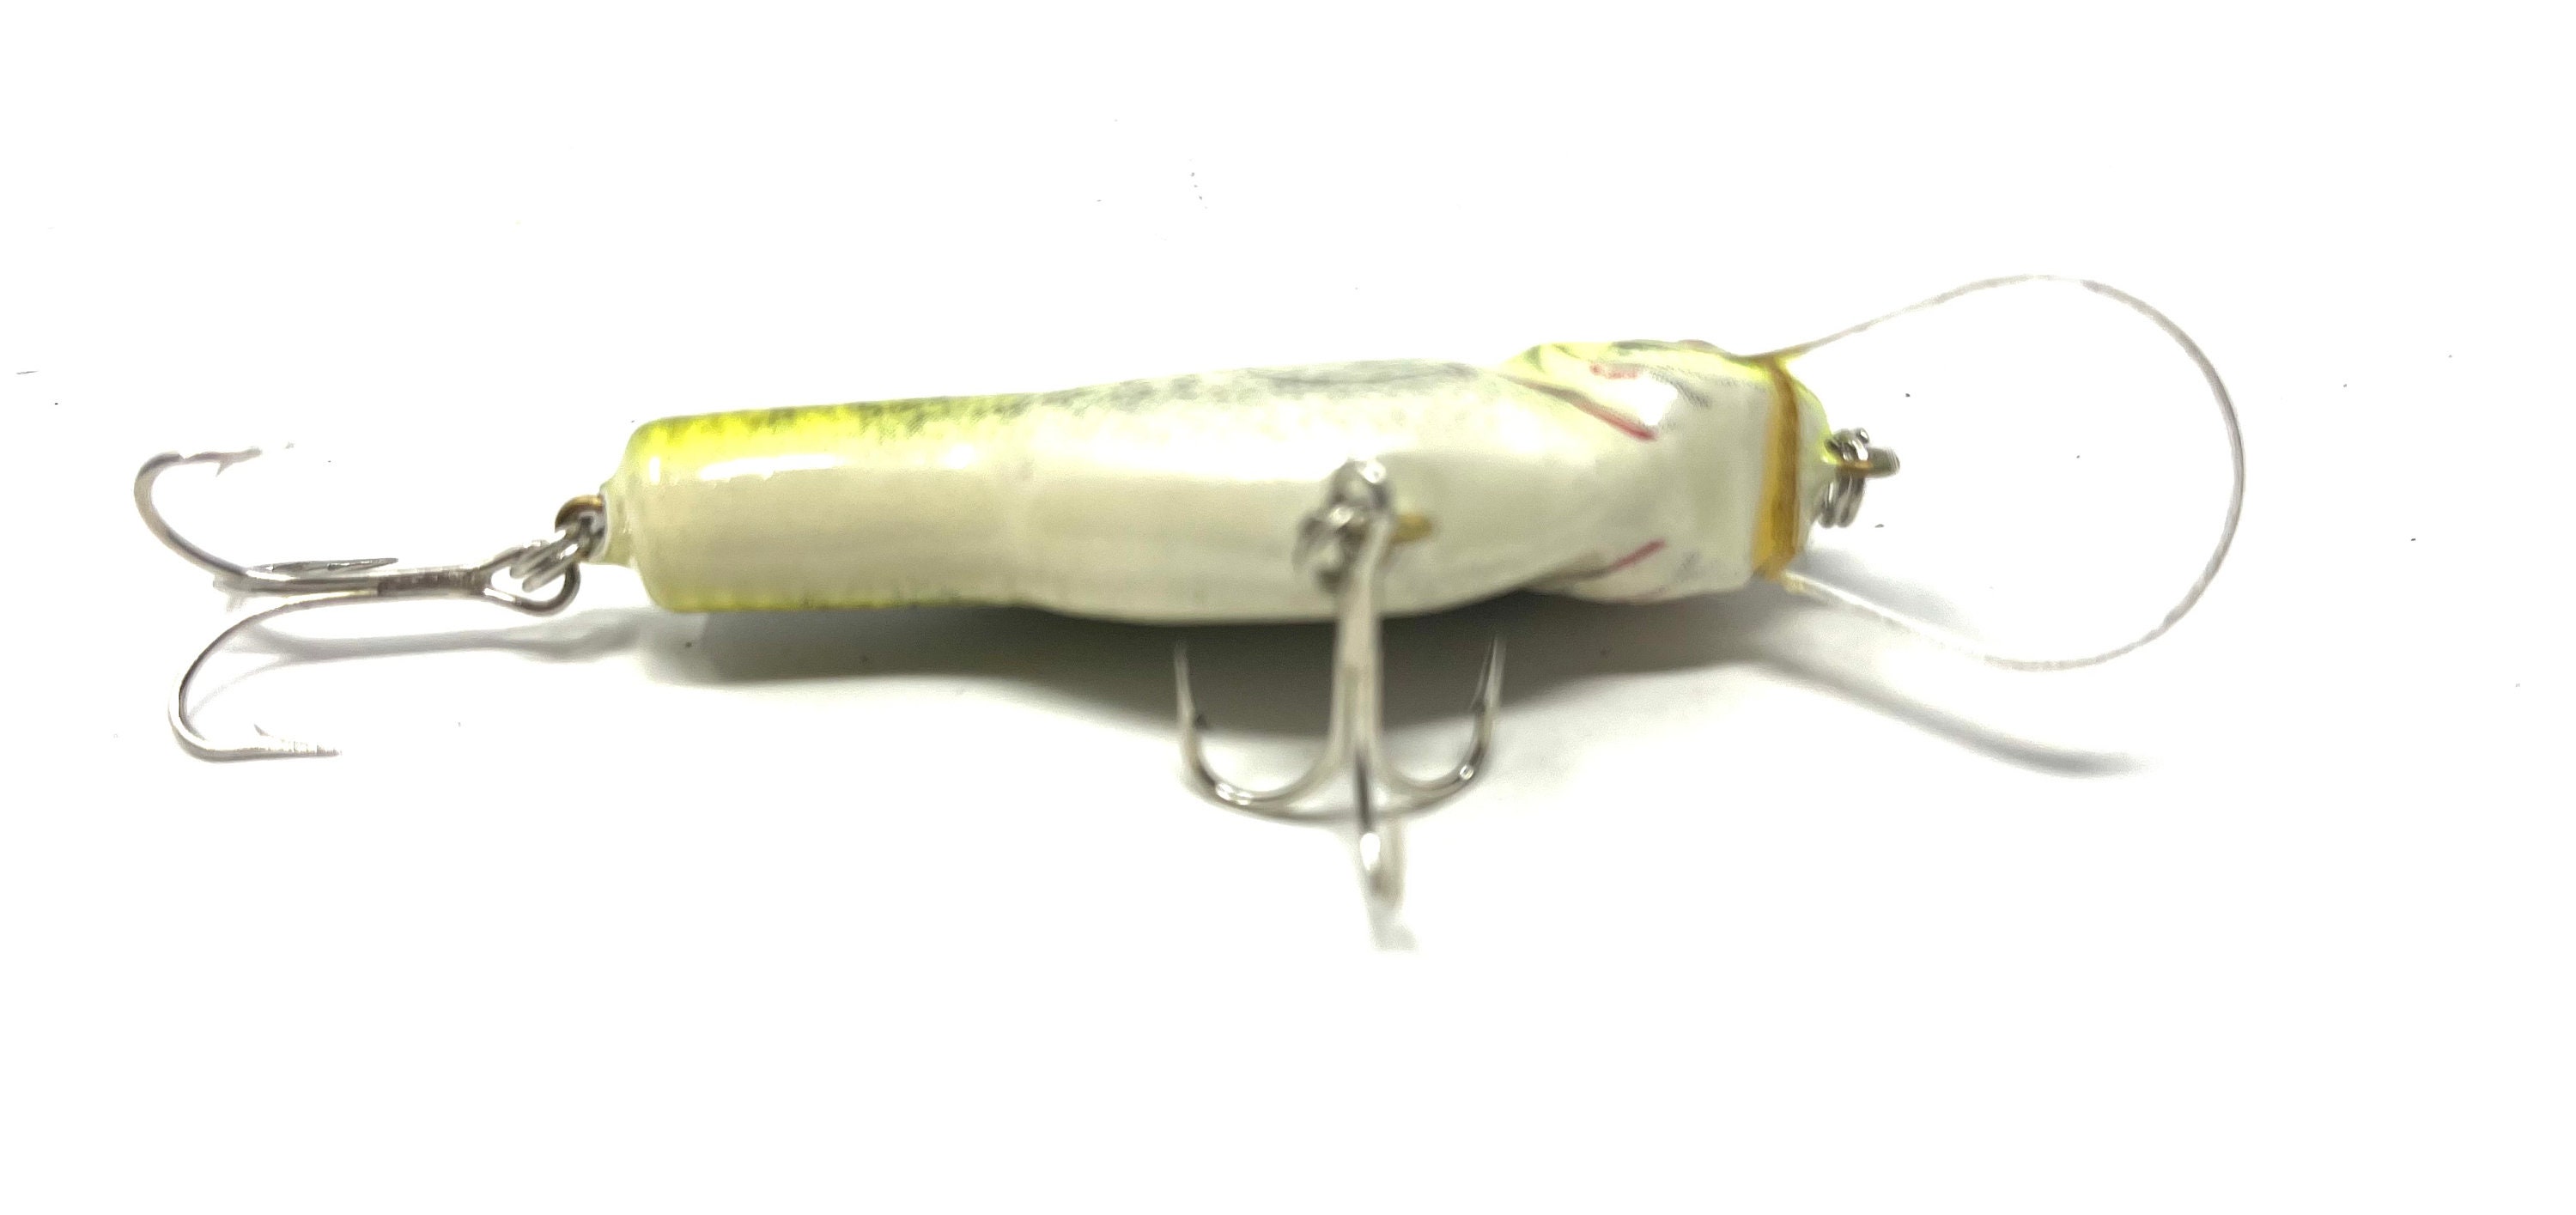 Bagley Small Fry 1 SF1 (Discontinued Line)  Fishing lures for sale, Small  fry, Antique fishing lures